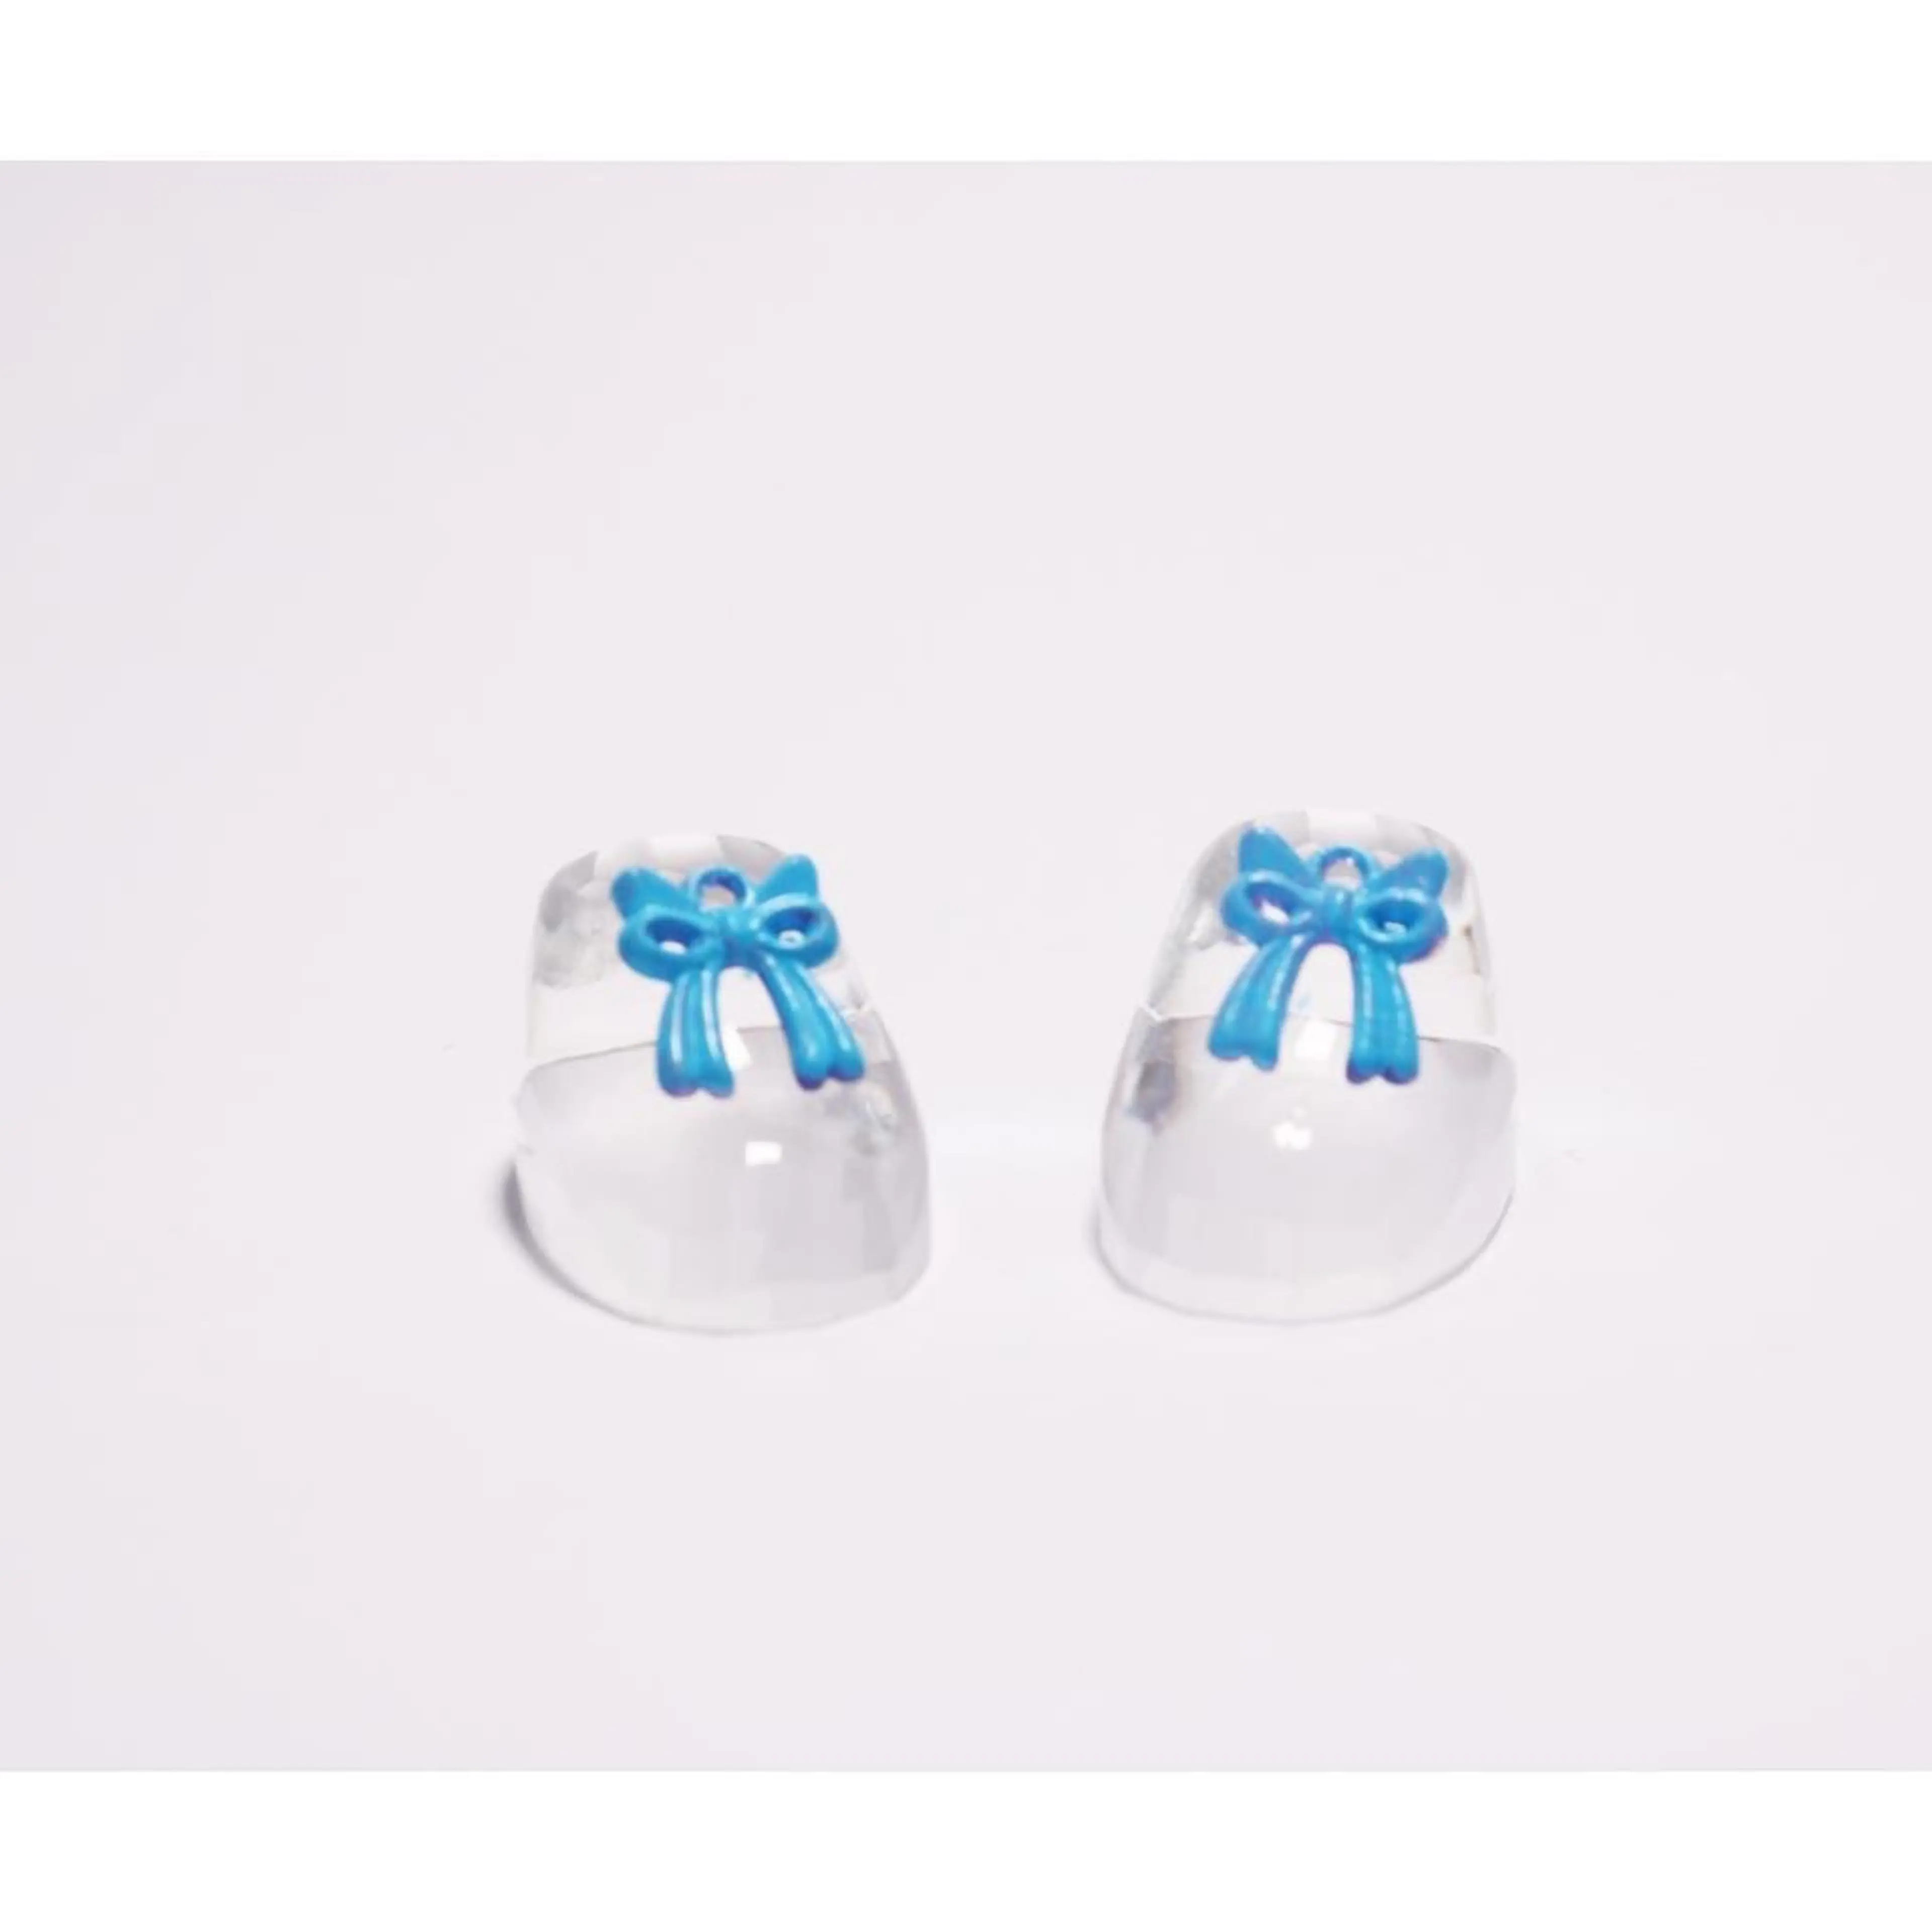 Crystal Boots Figurines